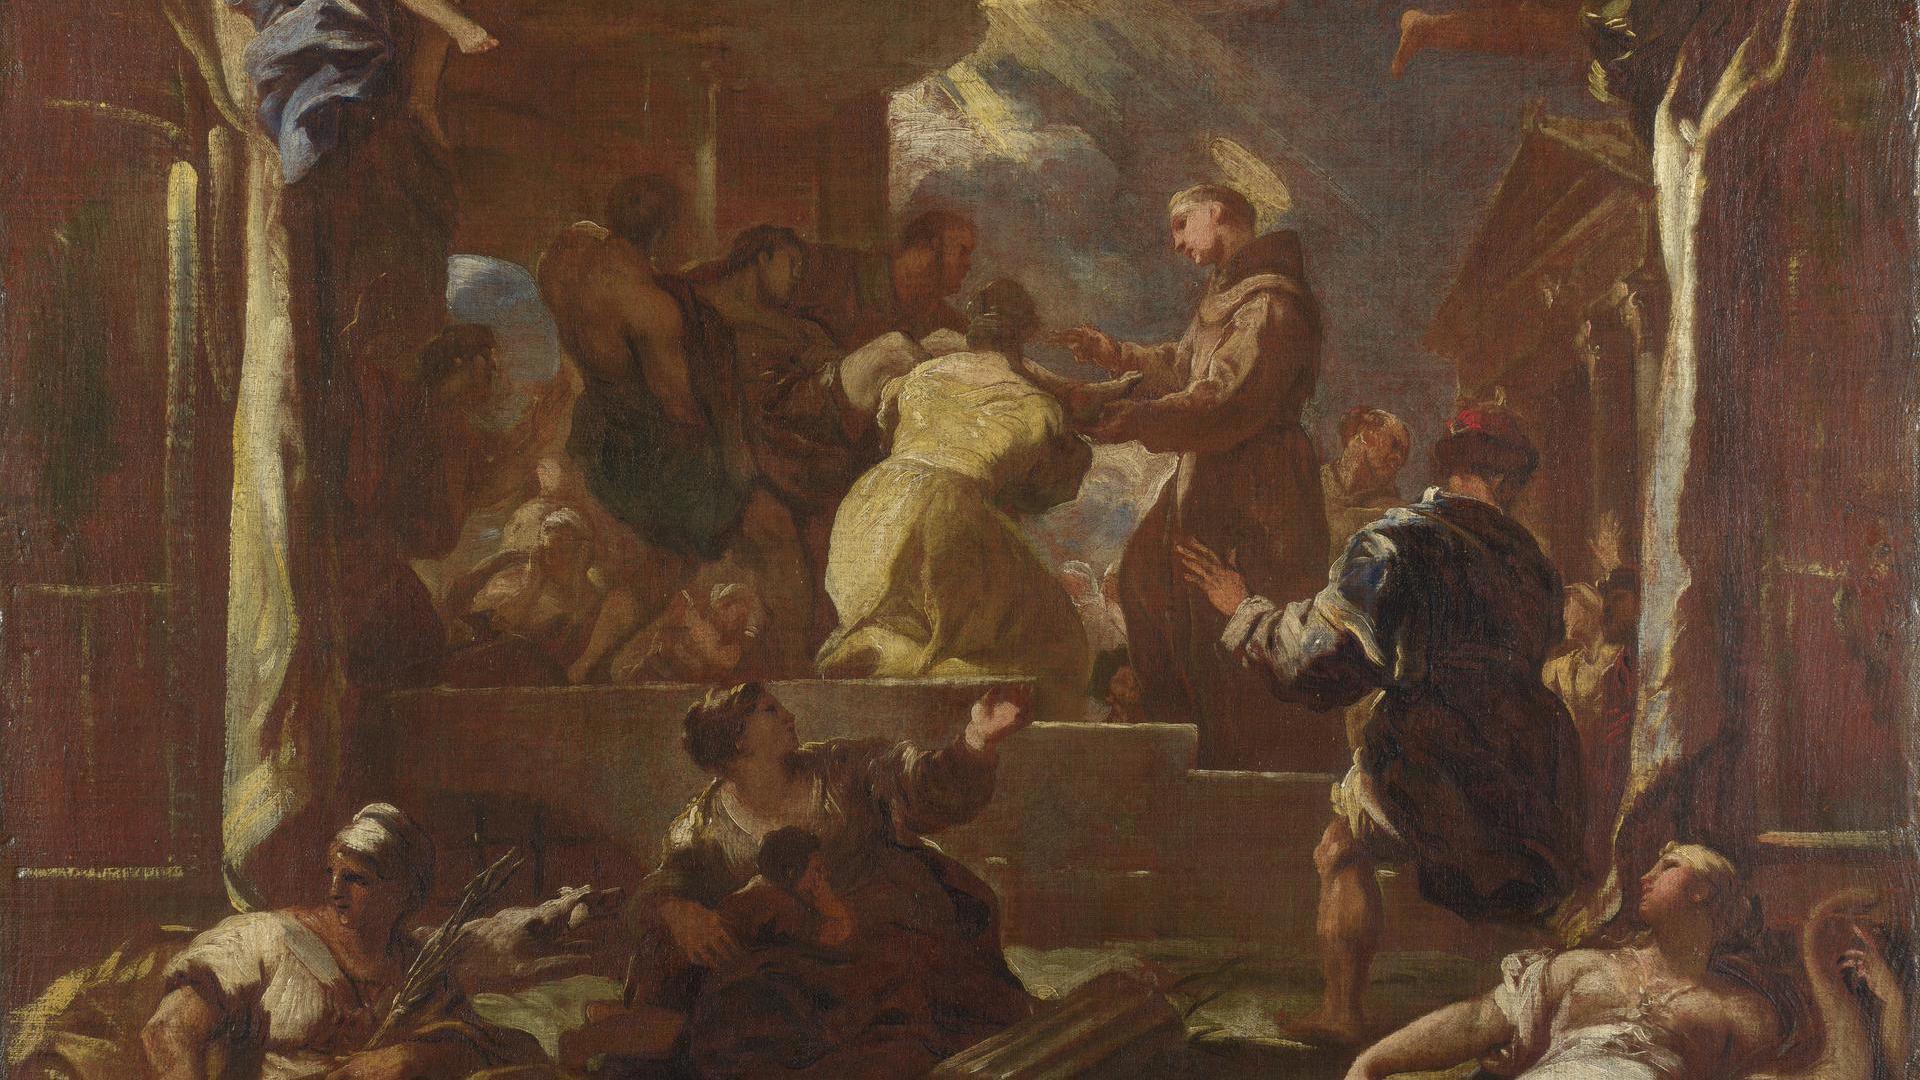 Saint Anthony of Padua restores the Foot of a Man by Luca Giordano